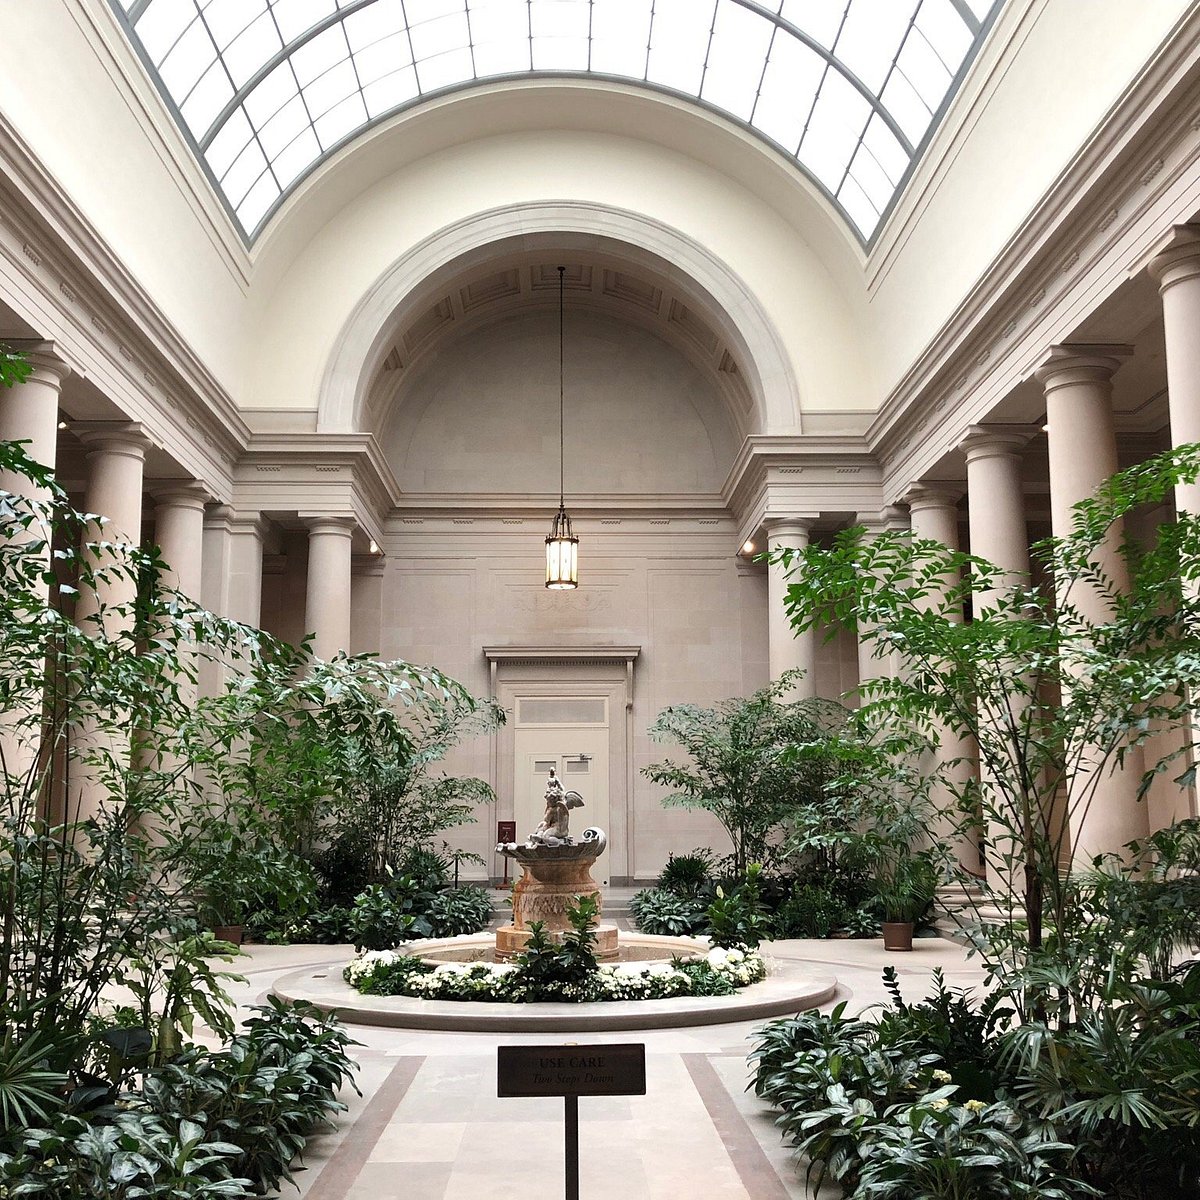 National Gallery of Art (Washington DC) UPDATED 2021 All You Need to